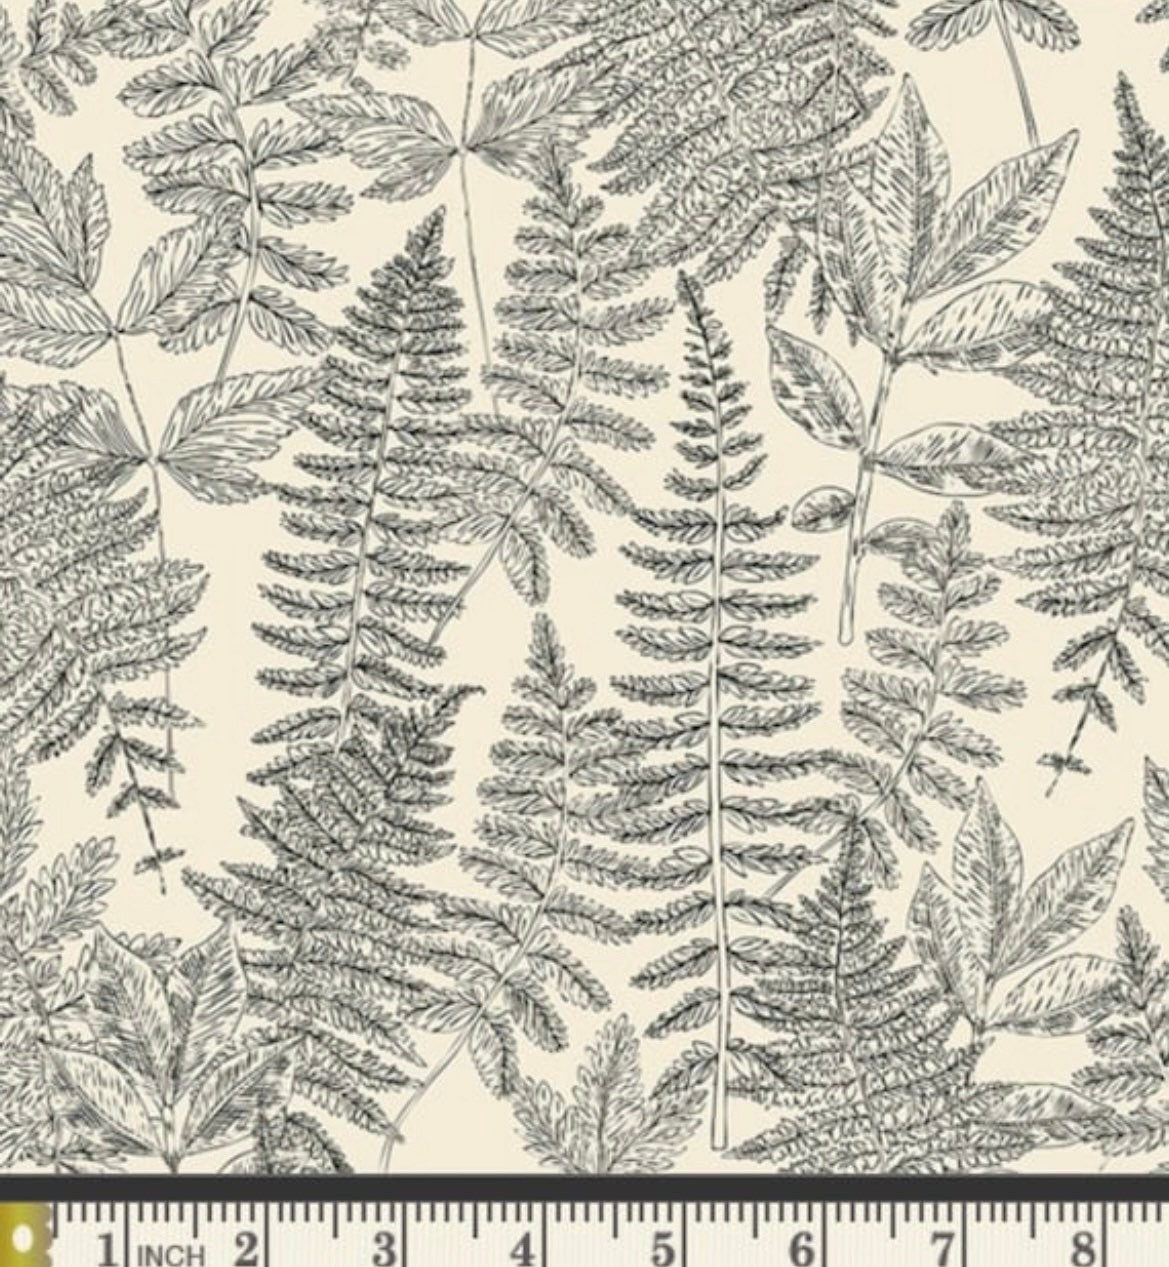 Green Thumb Three - Canvas - The Season of Tribute - Roots of Nature Collection by Bonnie Christine - Art Gallery Fabrics - 100% Cotton